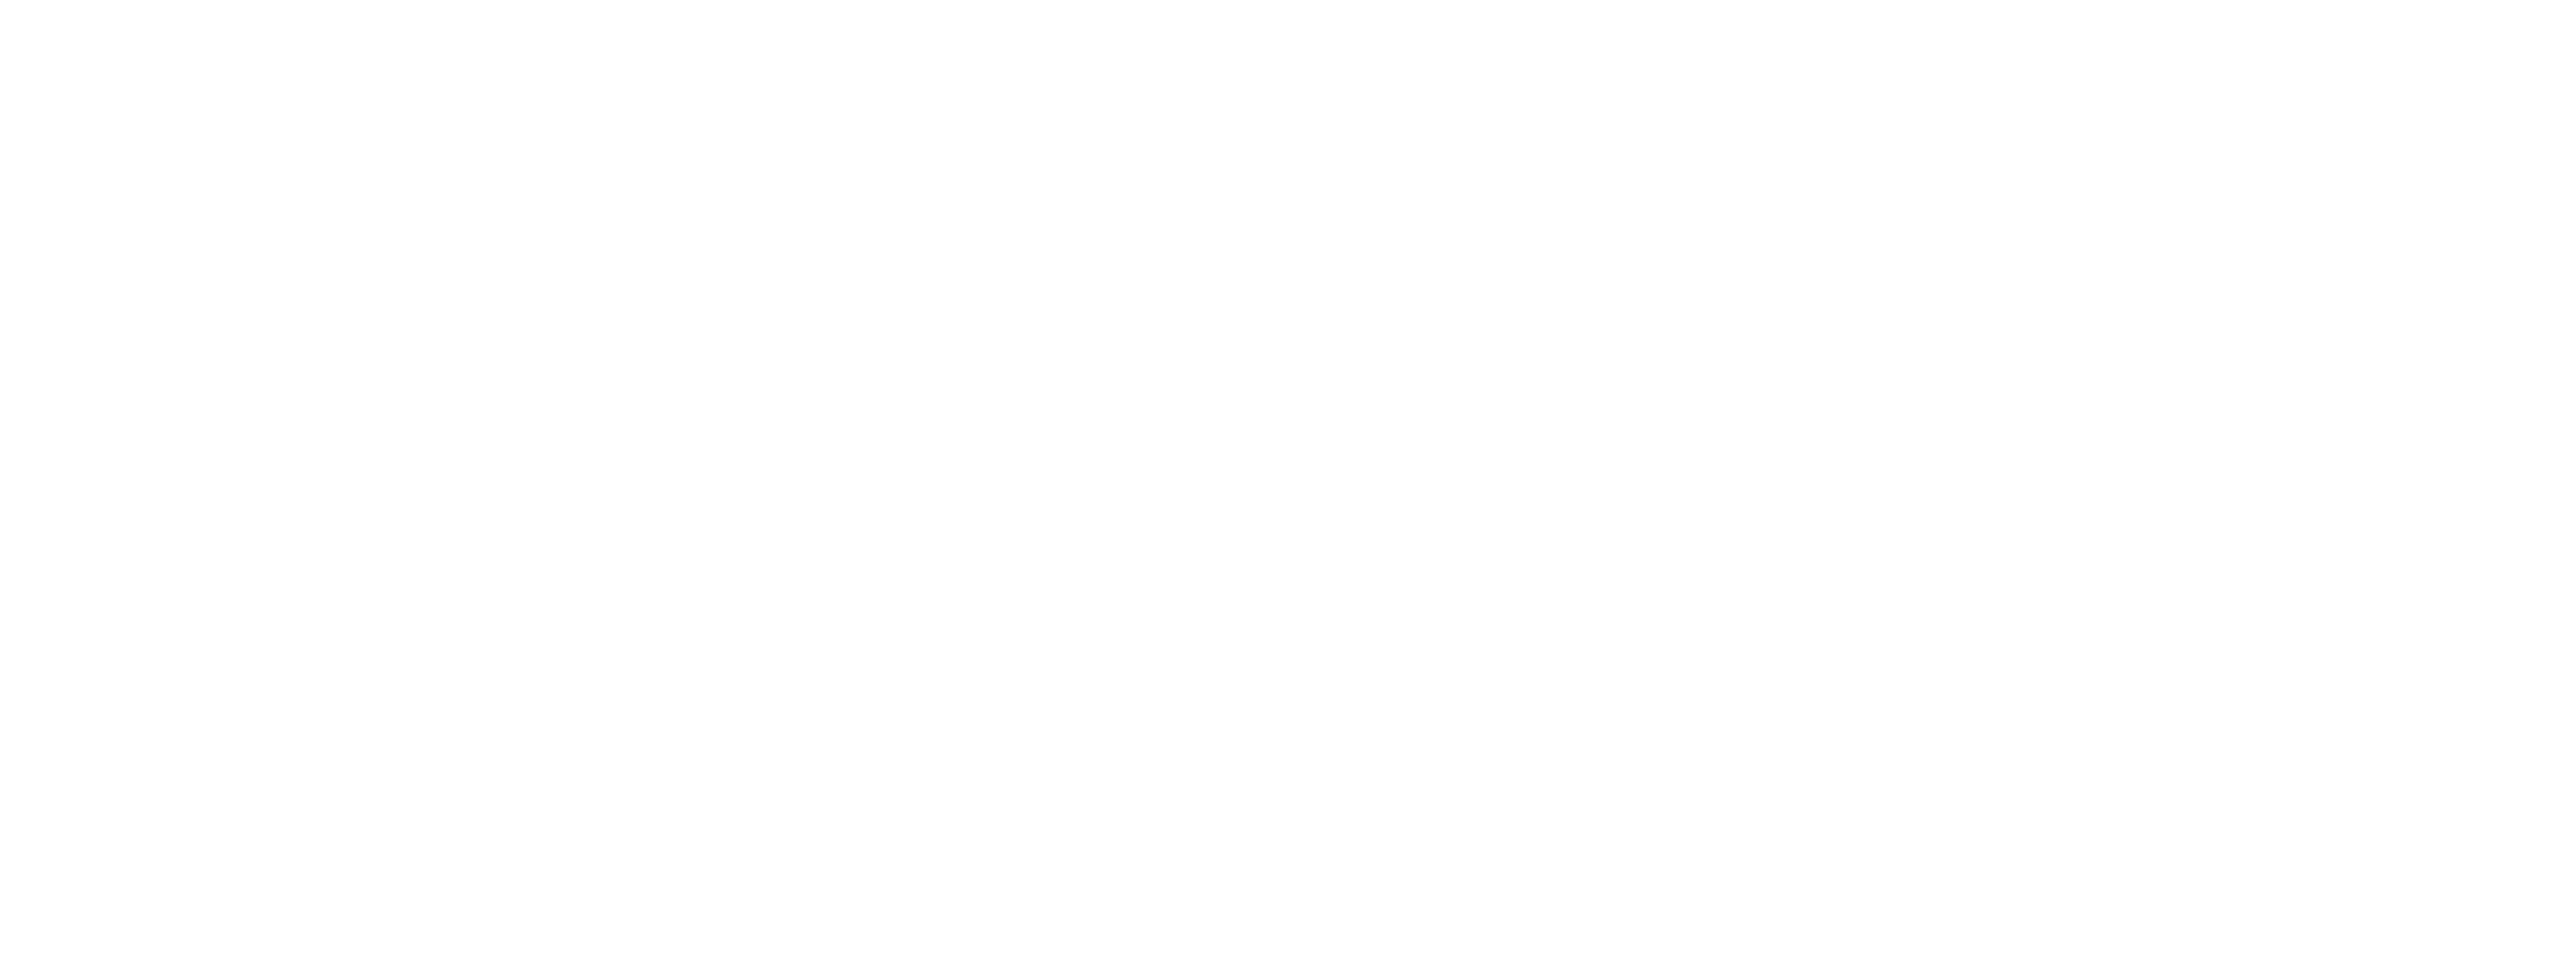 Just Love and a Thousand Songs logo